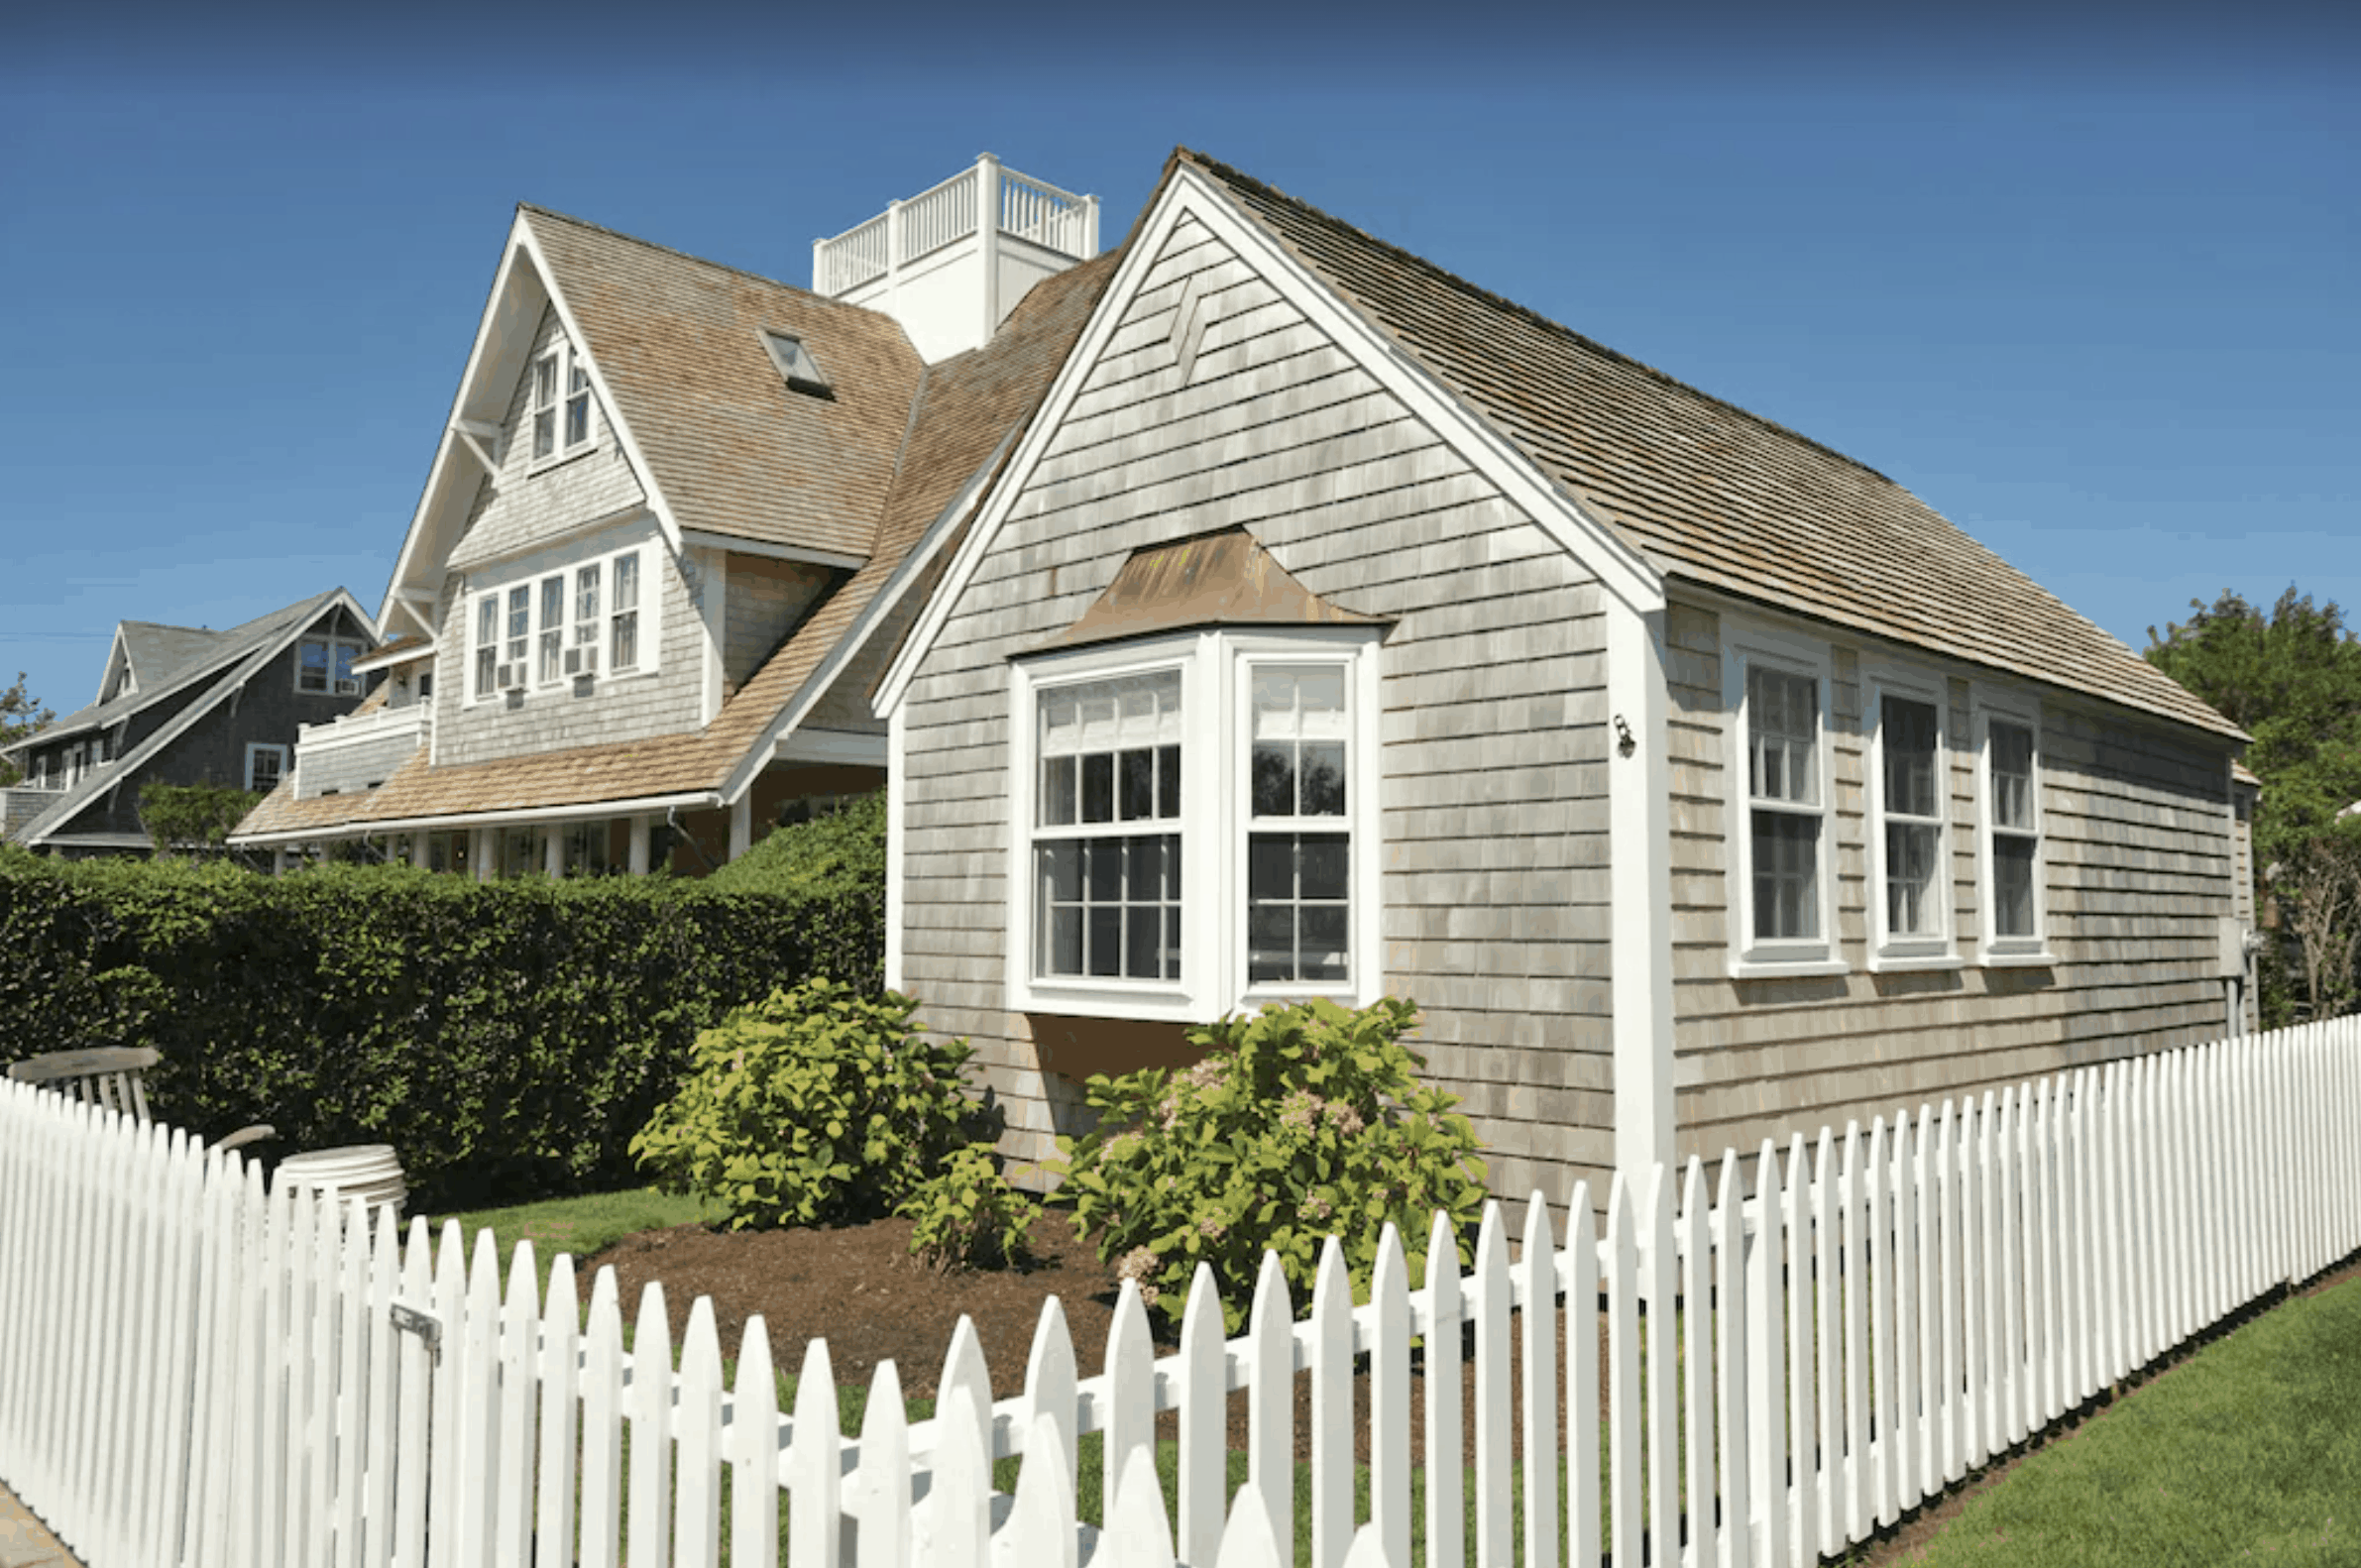 A grey cottage with a white picture window, surrounded by a white picket fence.